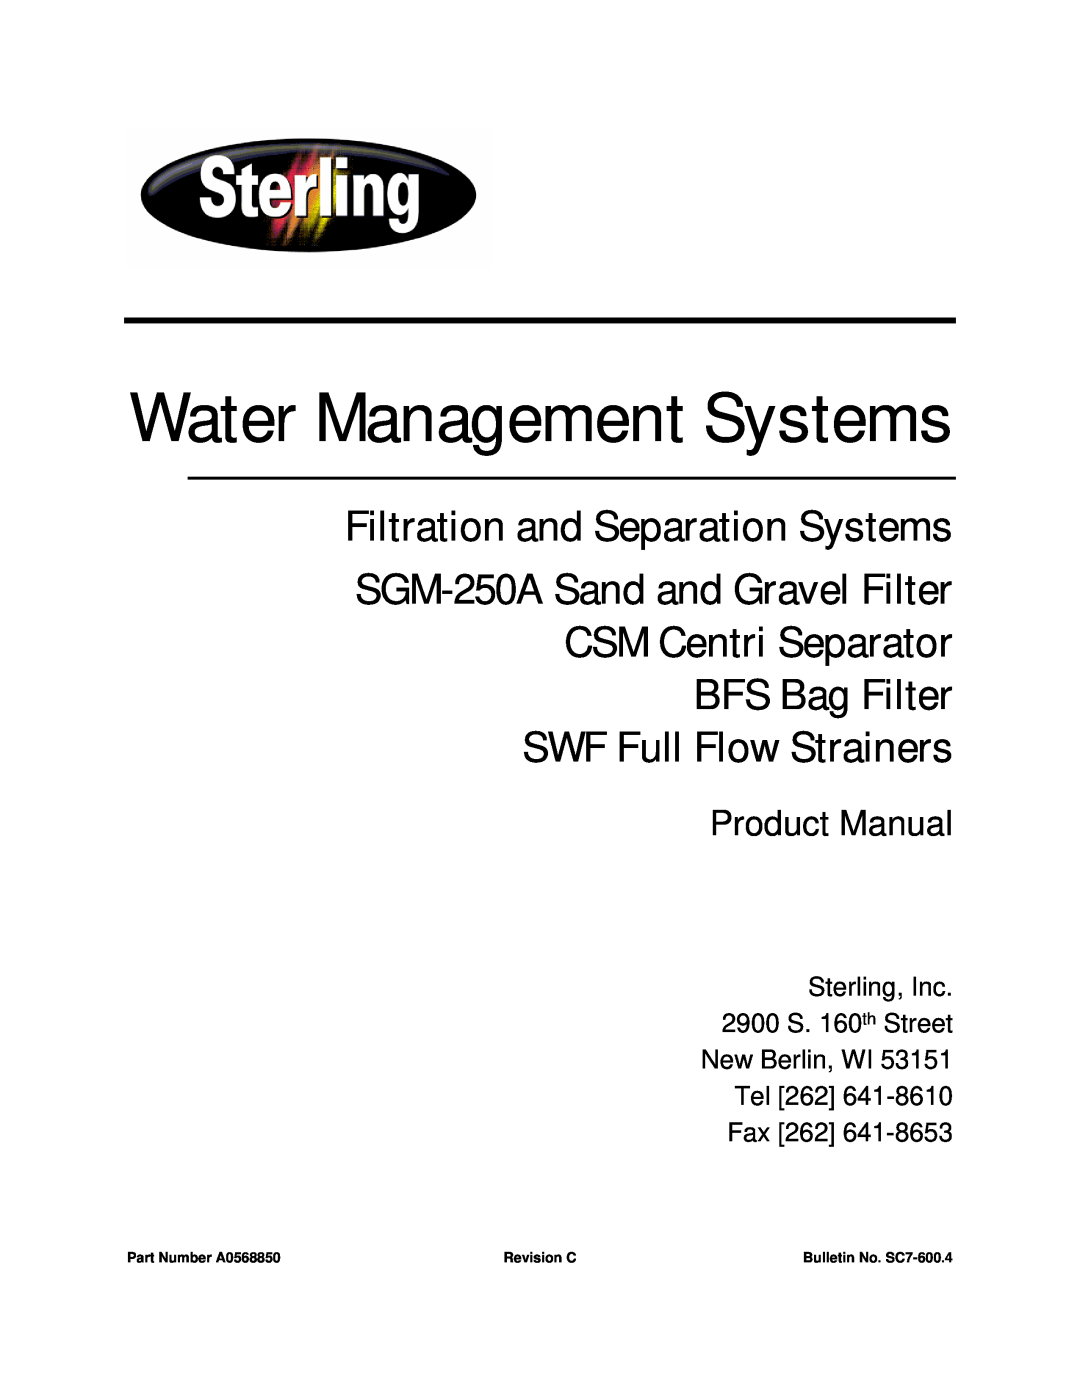 Sterling manual Water Management Systems, Filtration and Separation Systems, SGM-250ASand and Gravel Filter, Revision C 